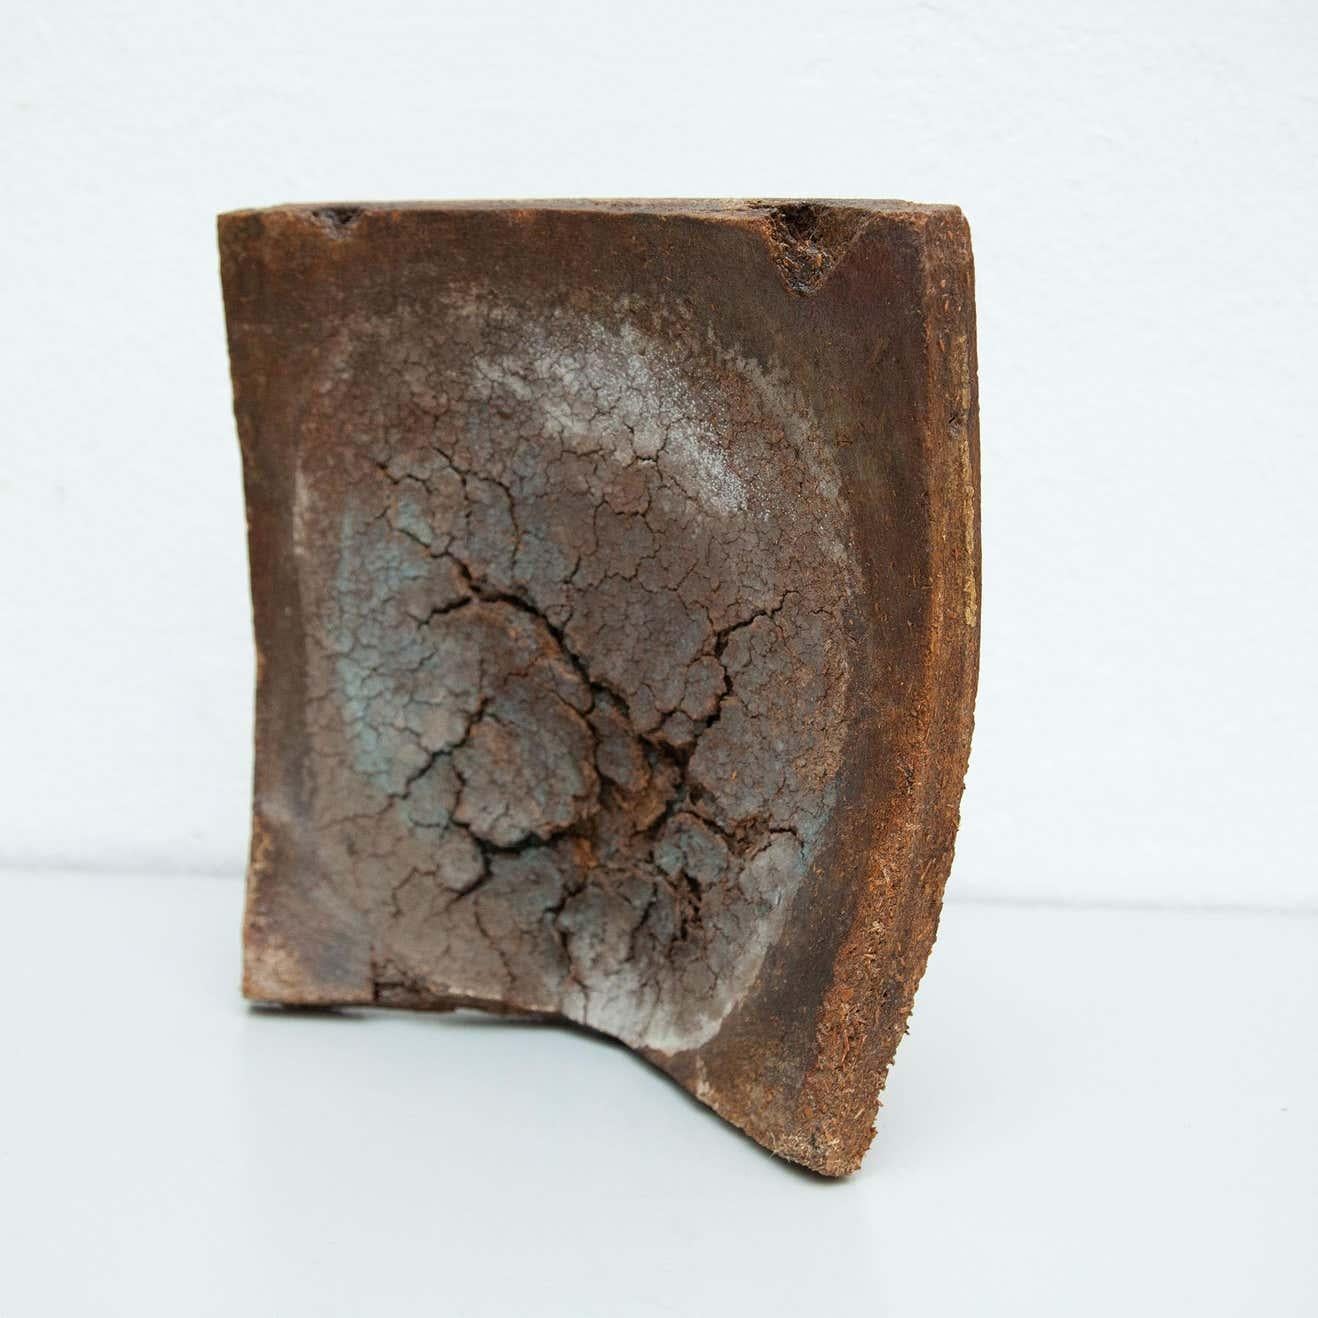 Sculpture by the artist Karl Nissan, circa 1986.

In original condition, with minor wear consistent with age and use, preserving a beautiful patina.


